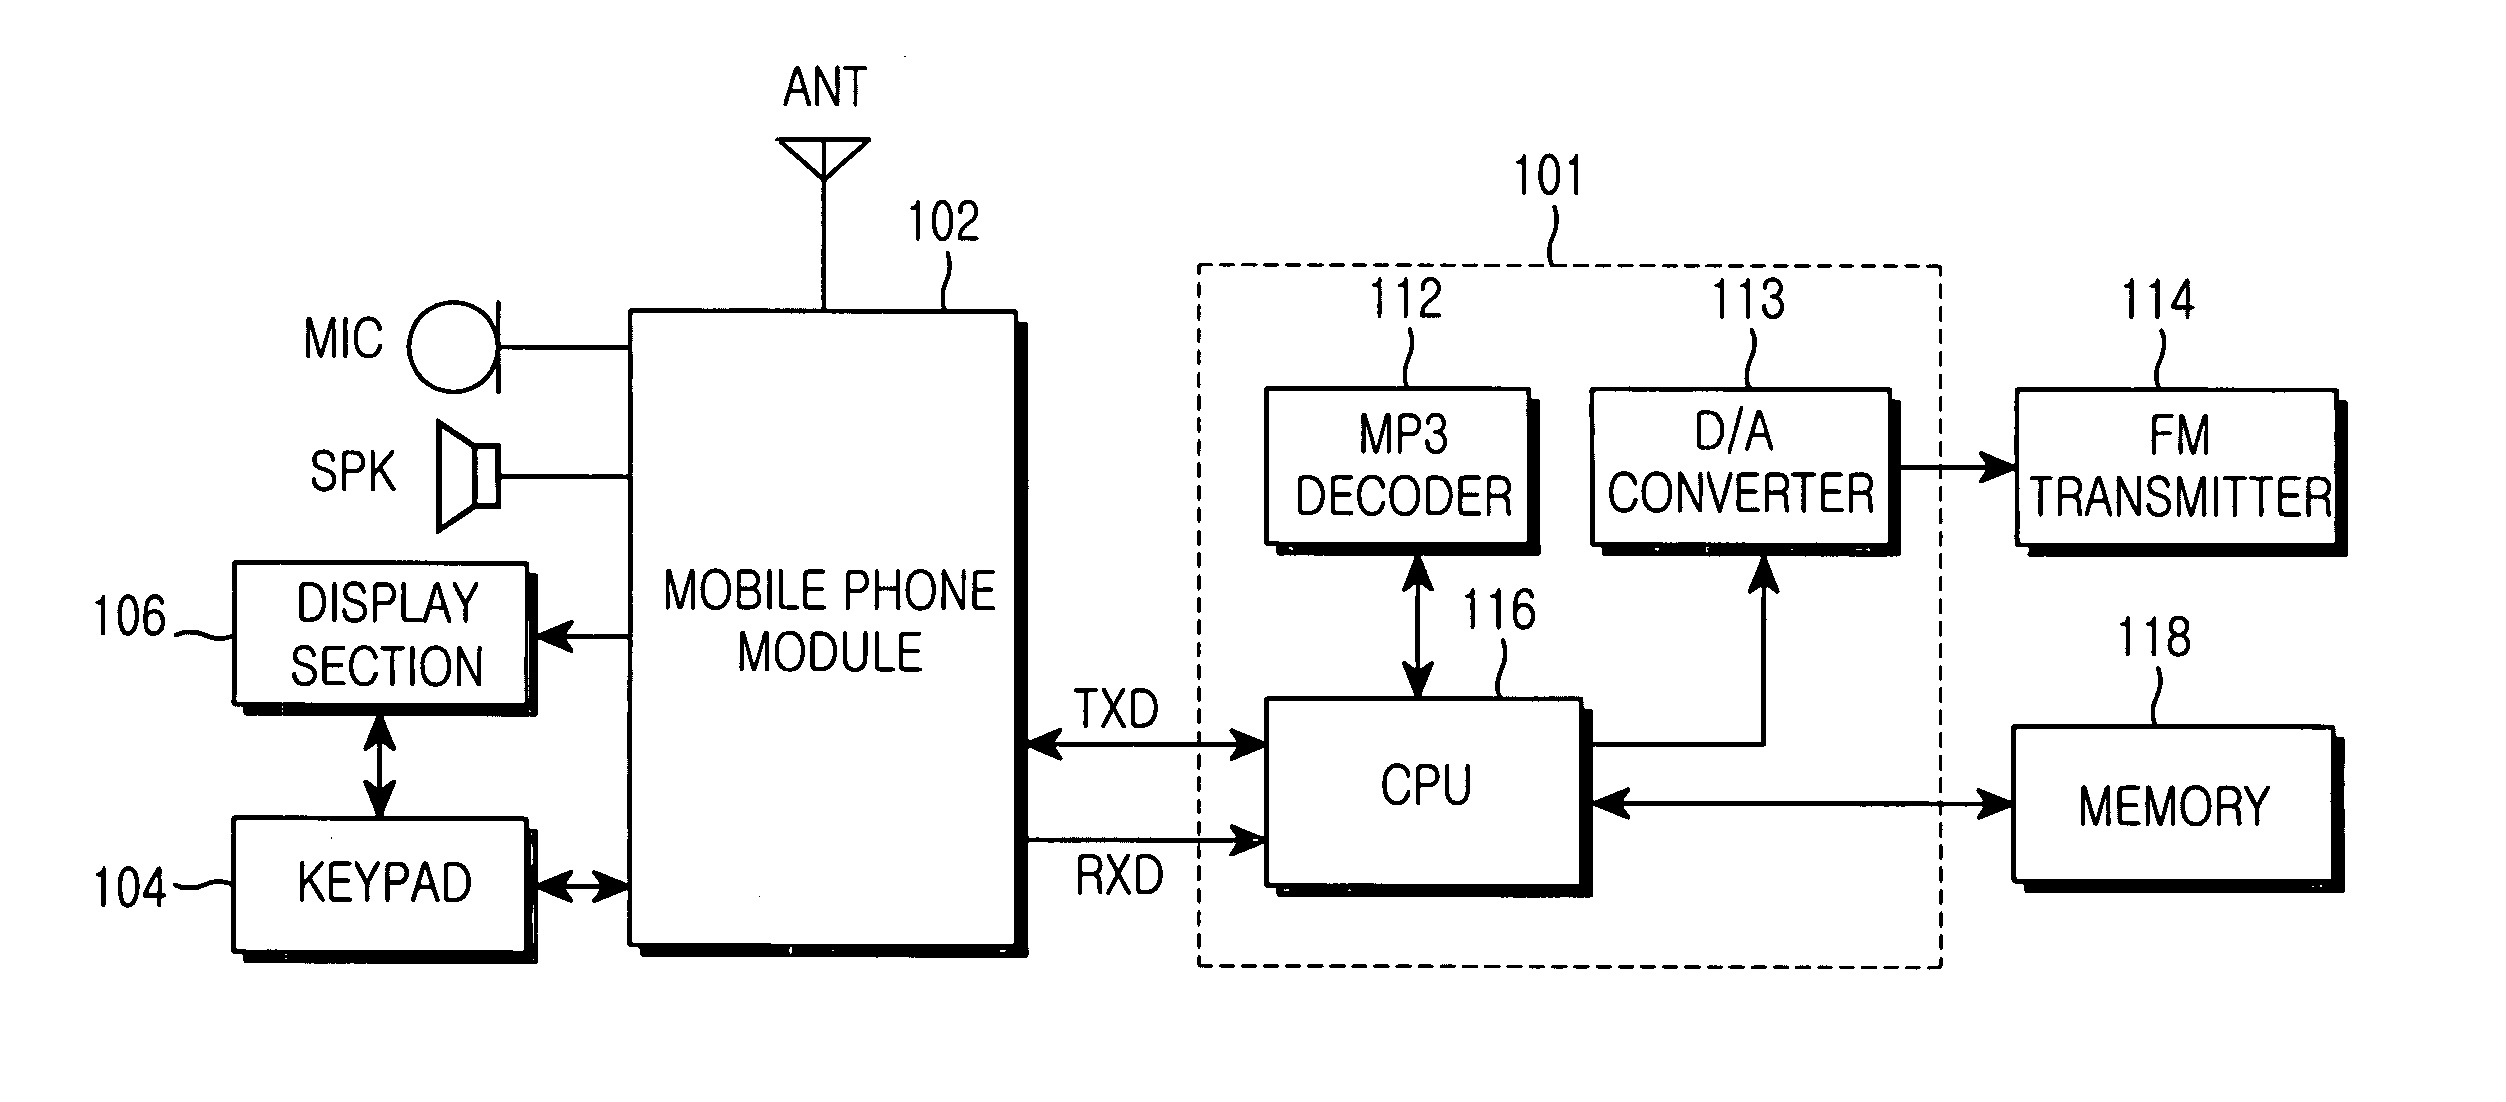 Method for controlling mobile phone to output audio signals and alert sounds through external audio player